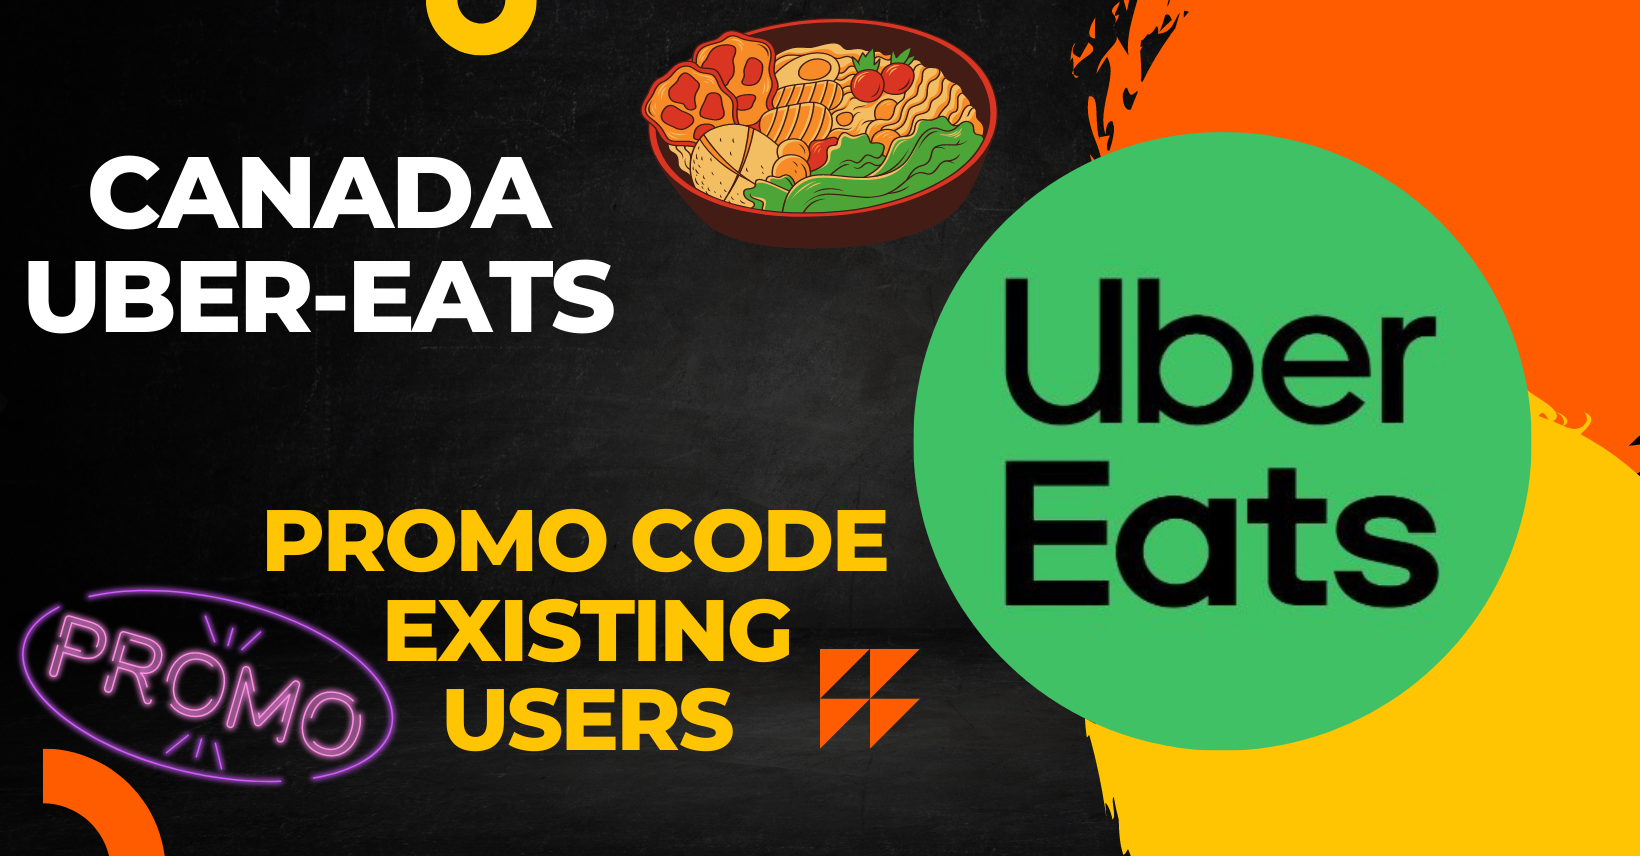 UberEats Promo Code "Canada" Existing Users 2023 New User